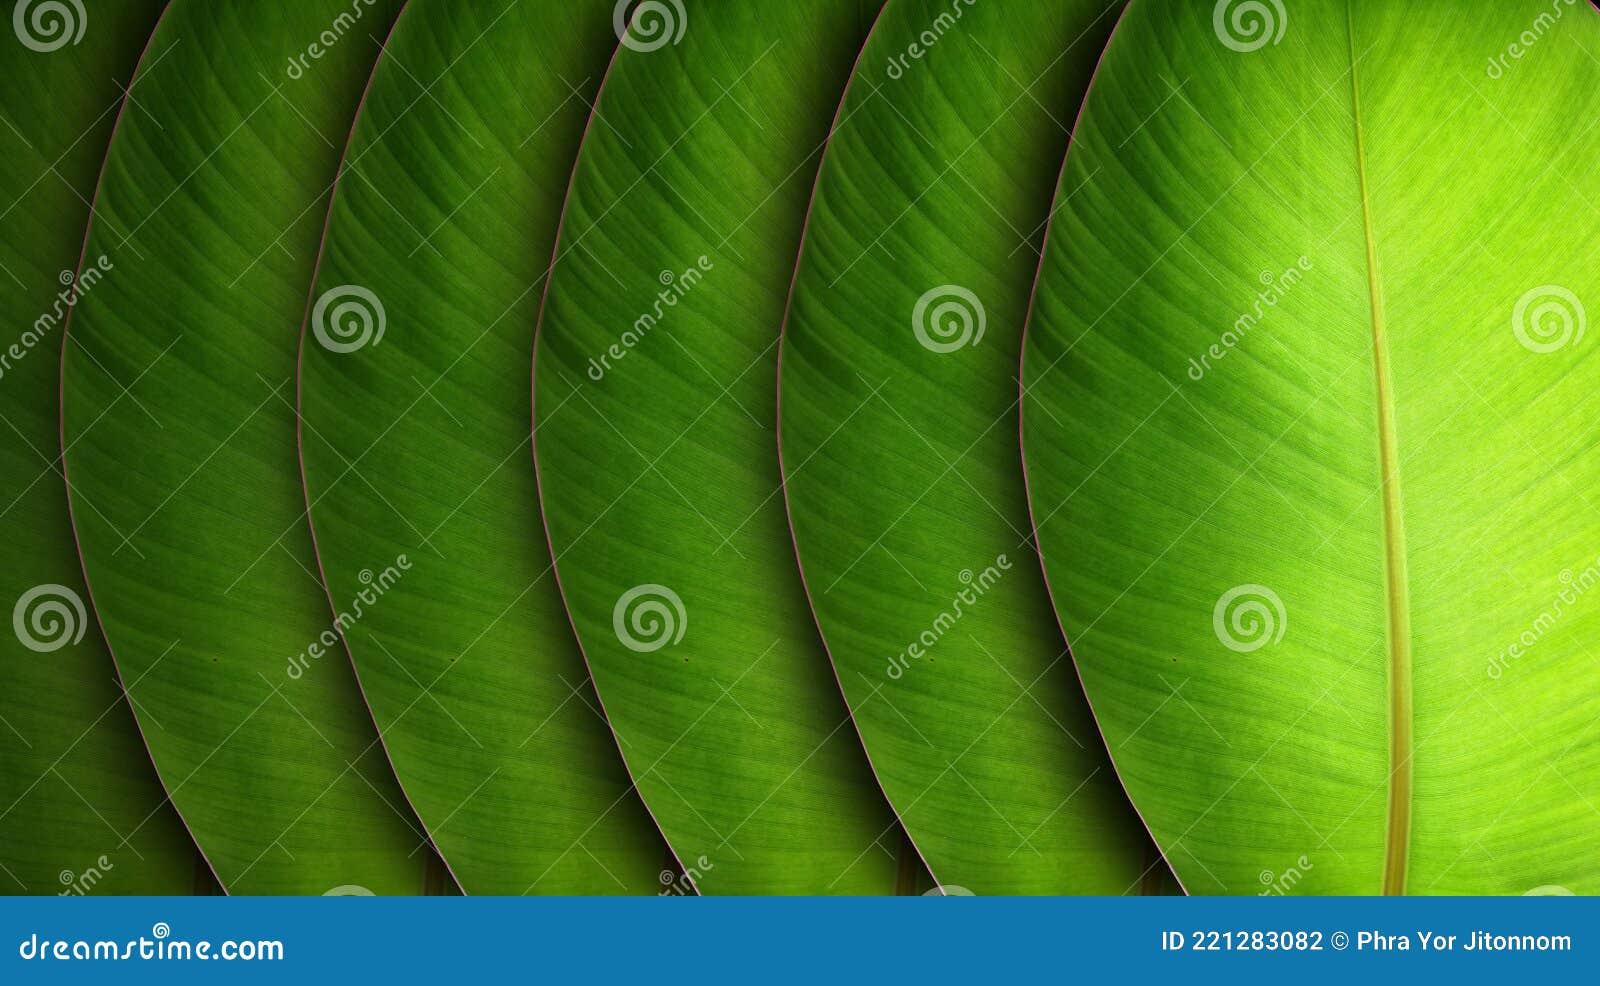 Banana Leaves in Black Background. Stock Photo - Image of nice